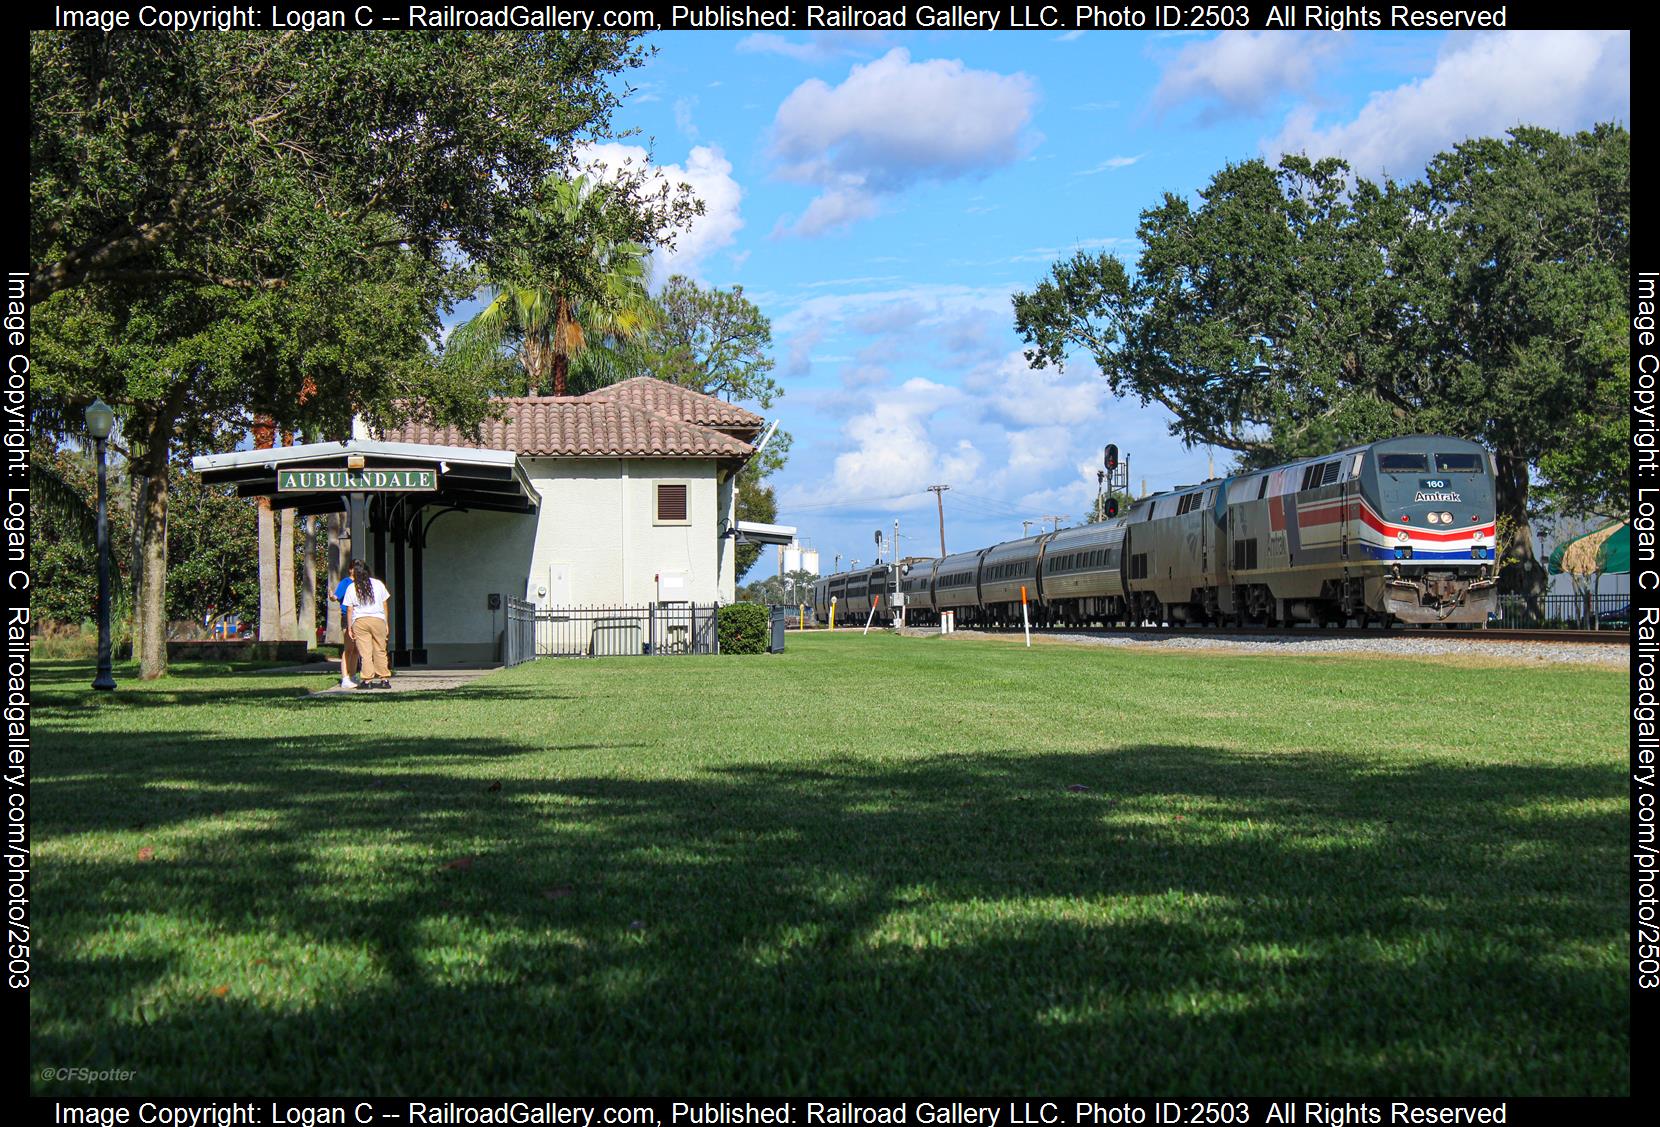 AMTK 160 AMTK 205 is a class P42DC and  is pictured in Aurburndale, Florida, United States.  This was taken along the Auburndale Subdivision on the Amtrak. Photo Copyright: Logan C uploaded to Railroad Gallery on 11/27/2023. This photograph of AMTK 160 AMTK 205 was taken on Saturday, November 18, 2023. All Rights Reserved. 